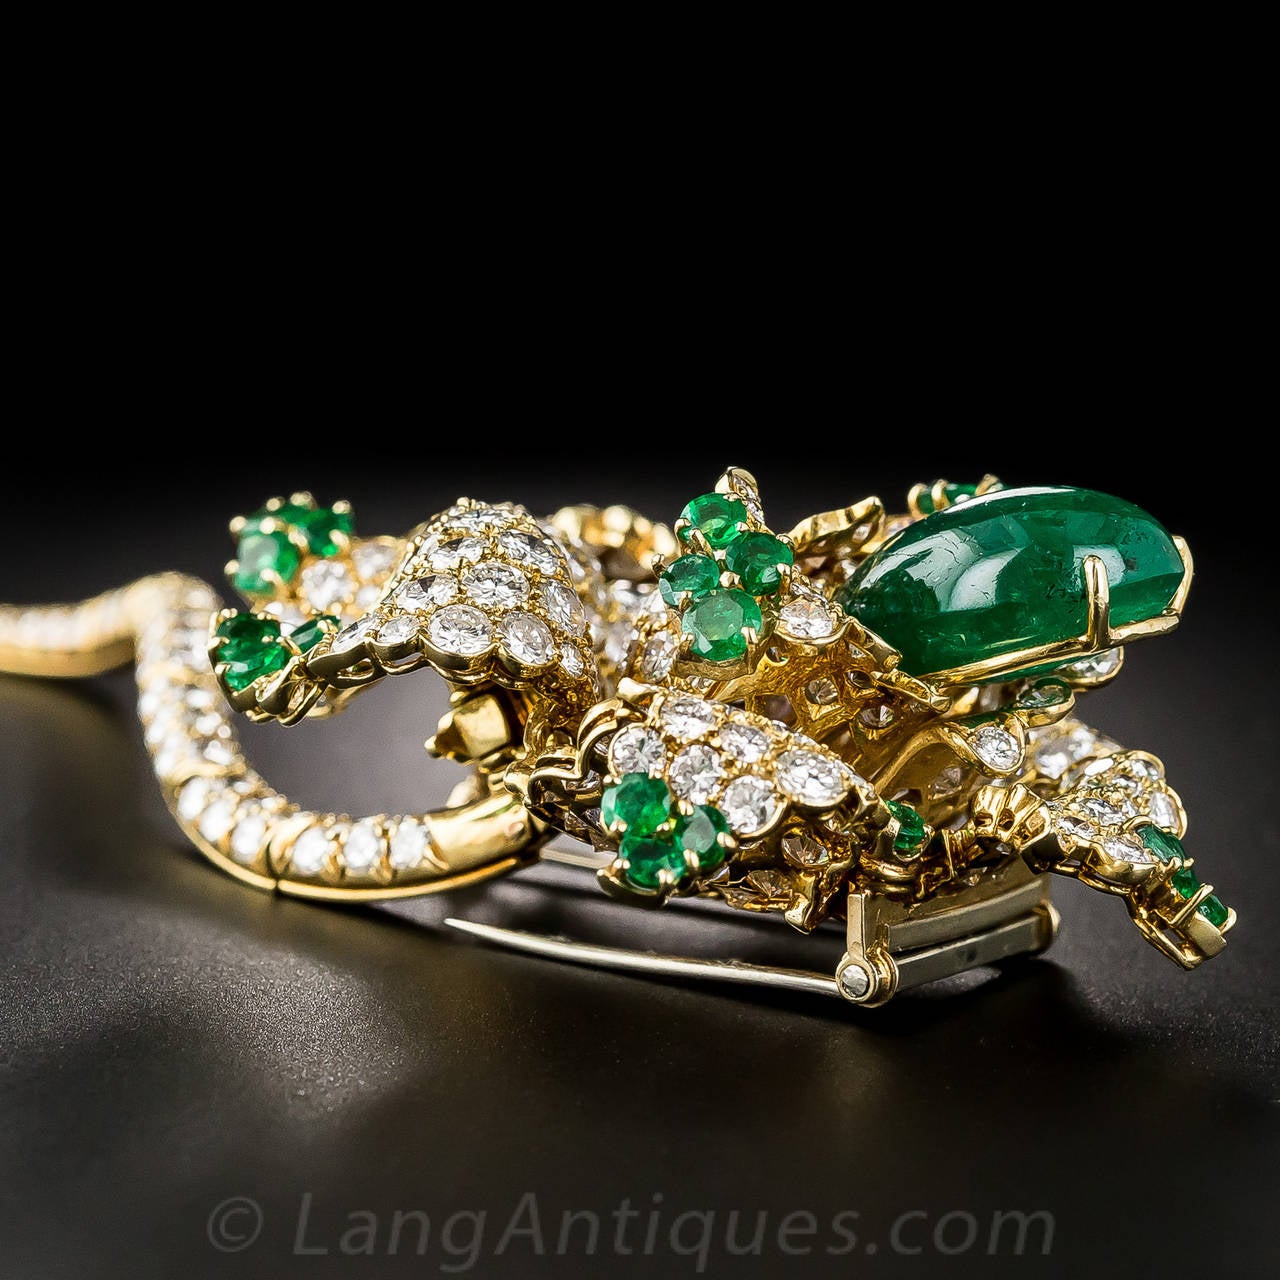 Spectacular 12 Carat Cabochon Emerald Diamond Gold Flower Brooch For Sale 4